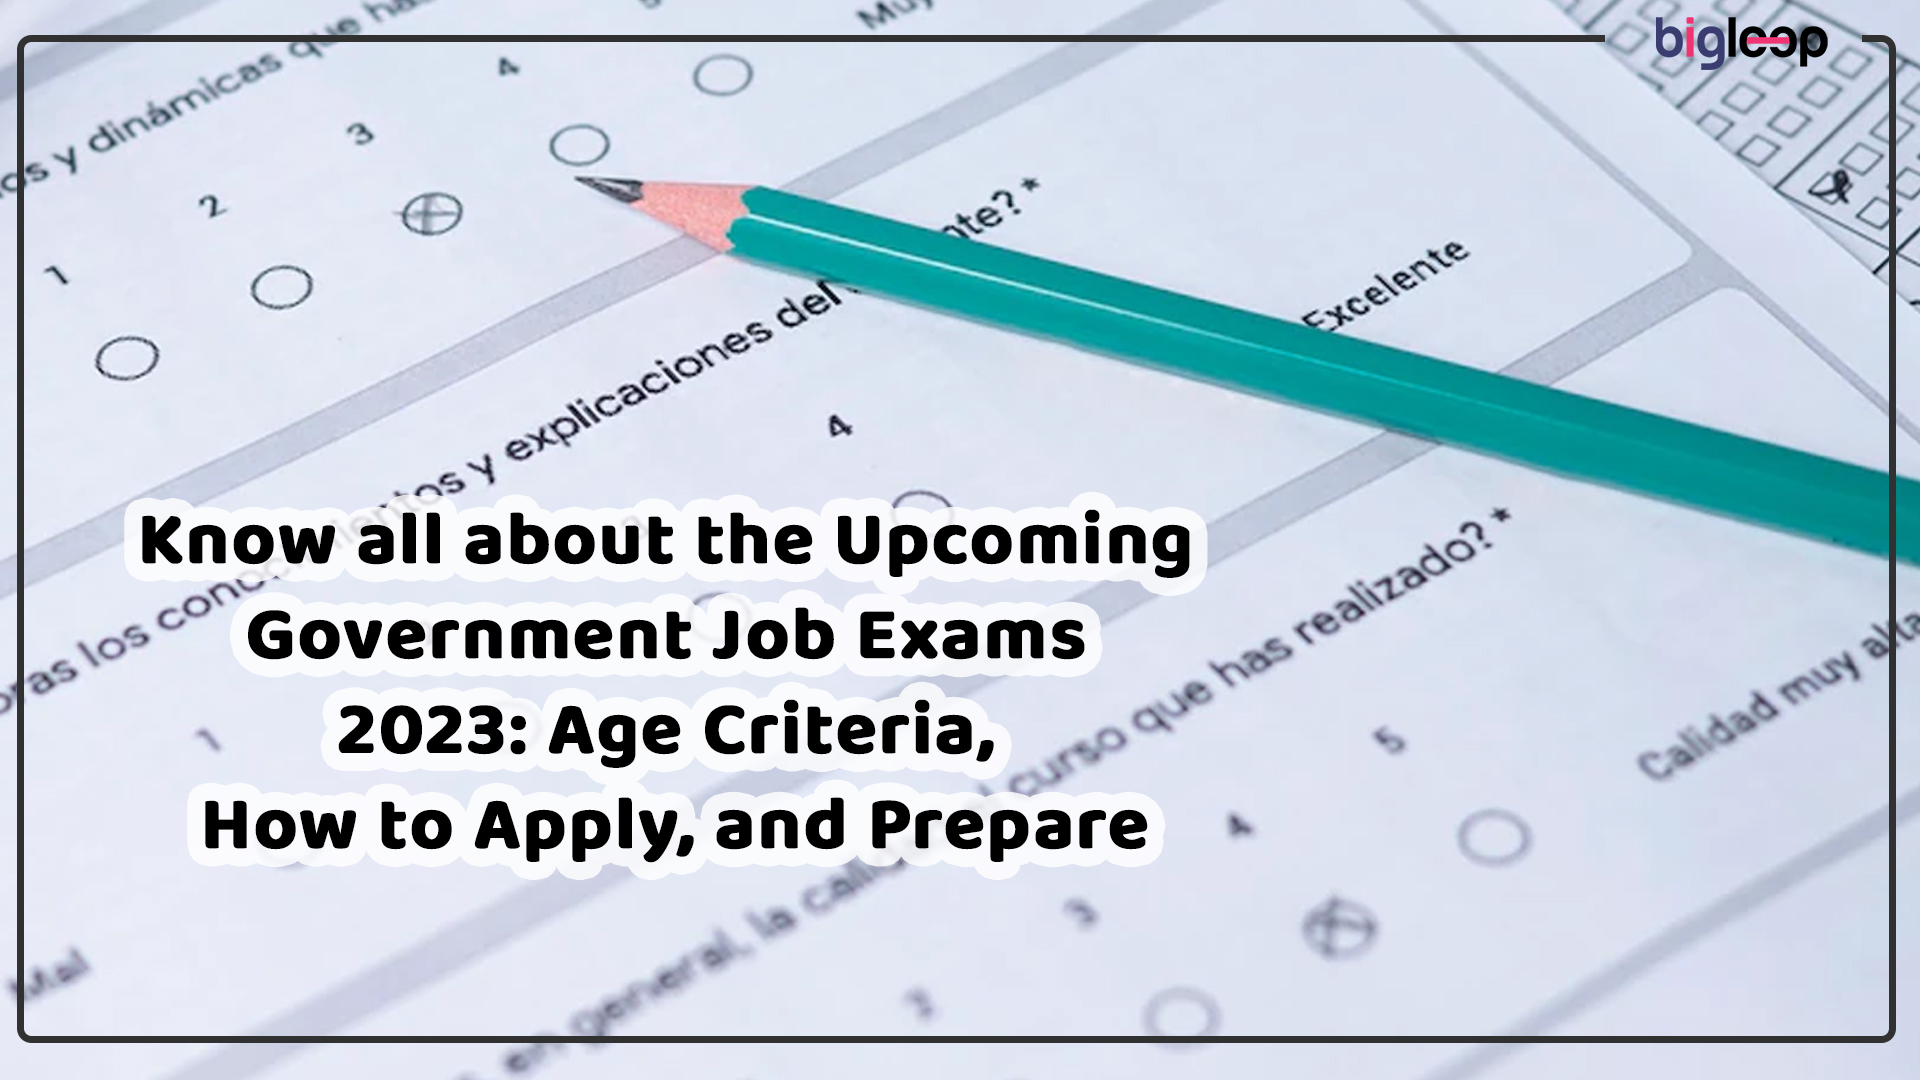 Know all about the Upcoming Government Job Exams 2023: Age Criteria, How to Apply, and Prepare